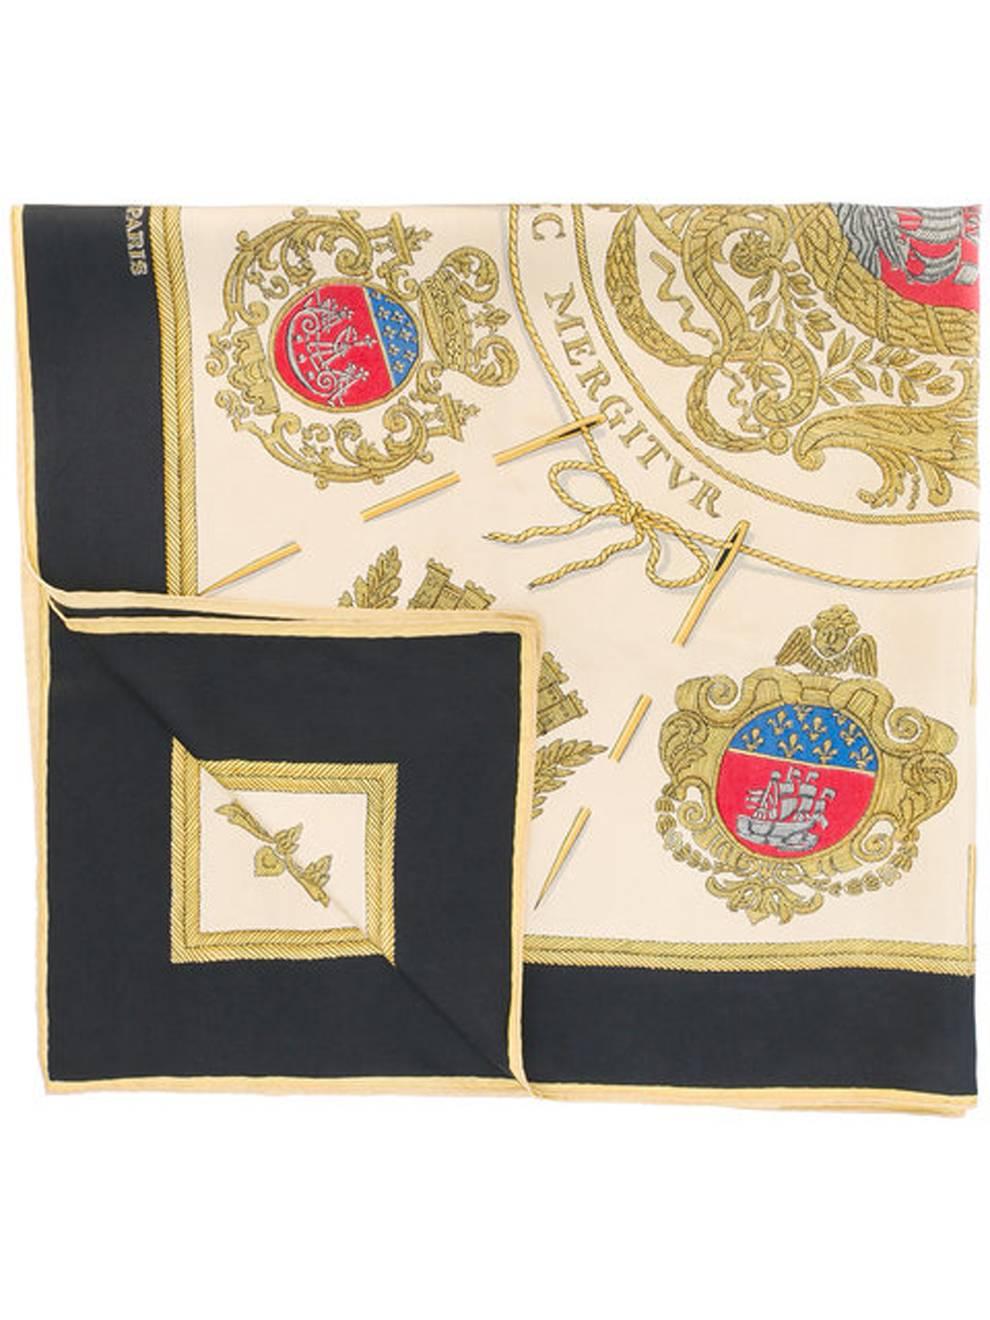 Multicoloured Hermès Les Armes De Paris silk scarf featuring a black outline and a printed regal scene.35,4in. (90cm) X 35,4in. (90cm)
In excellent vintage condition. Made in France.
We guarantee you will receive this gorgeous item as described and